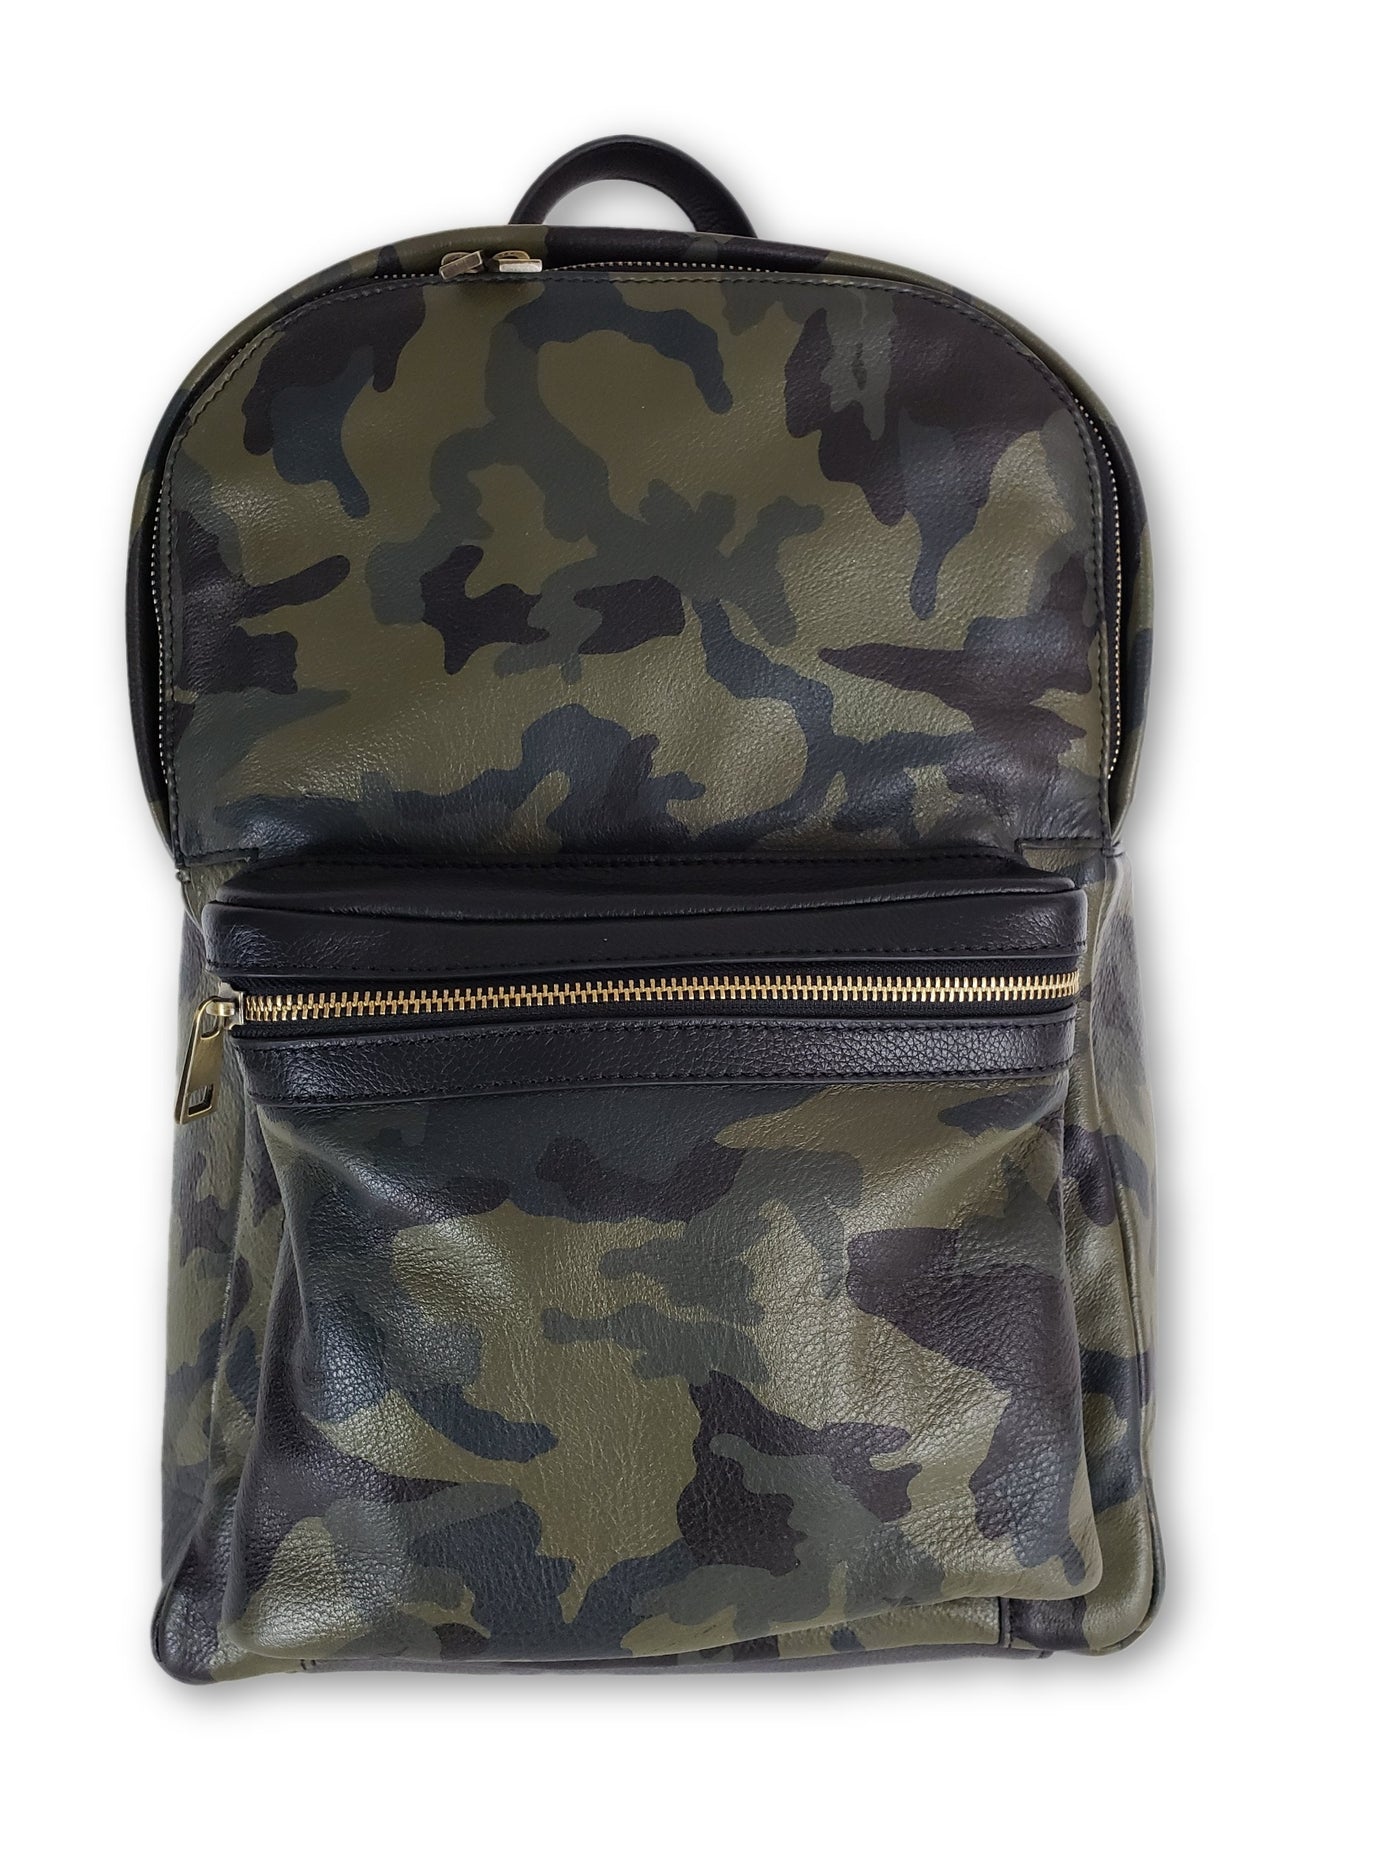  Herdesigns Custom Camo Backpack for Men Women with Name Personalized  Camo Green Shoulder Traveling Bag with Name Customized Travel Laptop Bag  Casual Backpacks : Electronics